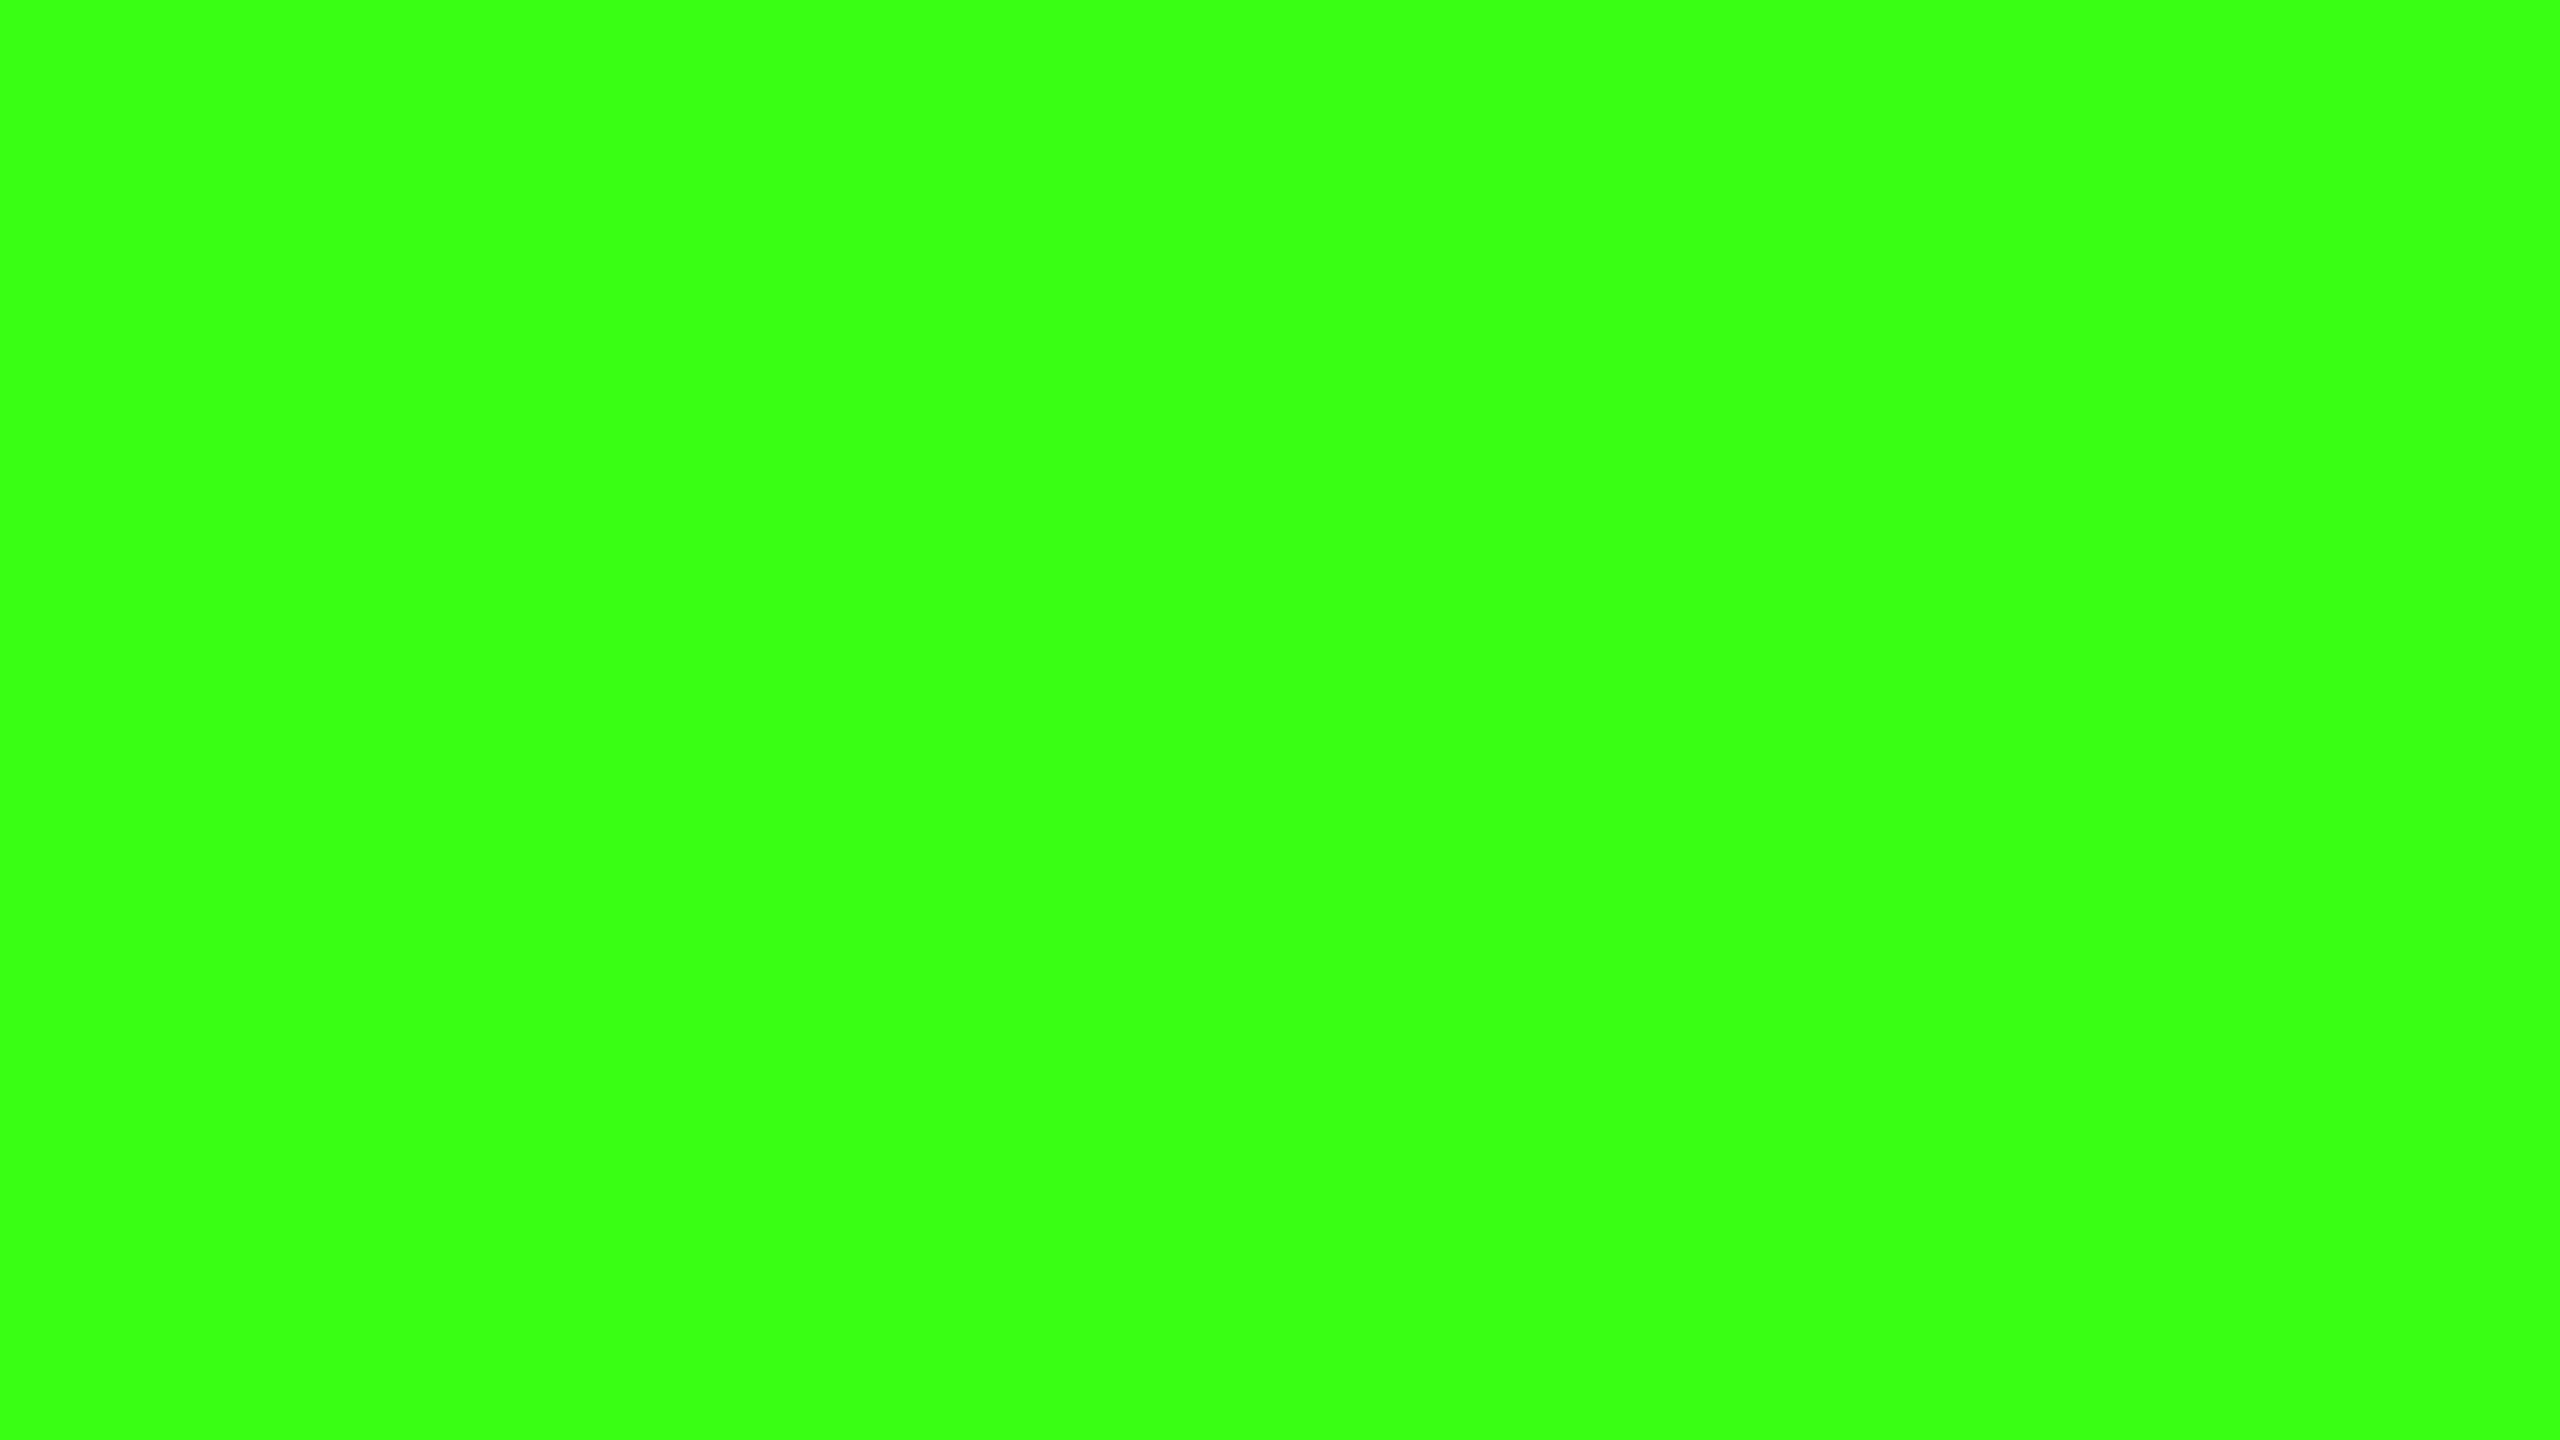 Solid Green Background Solid Green Wallpaper Images Thousands